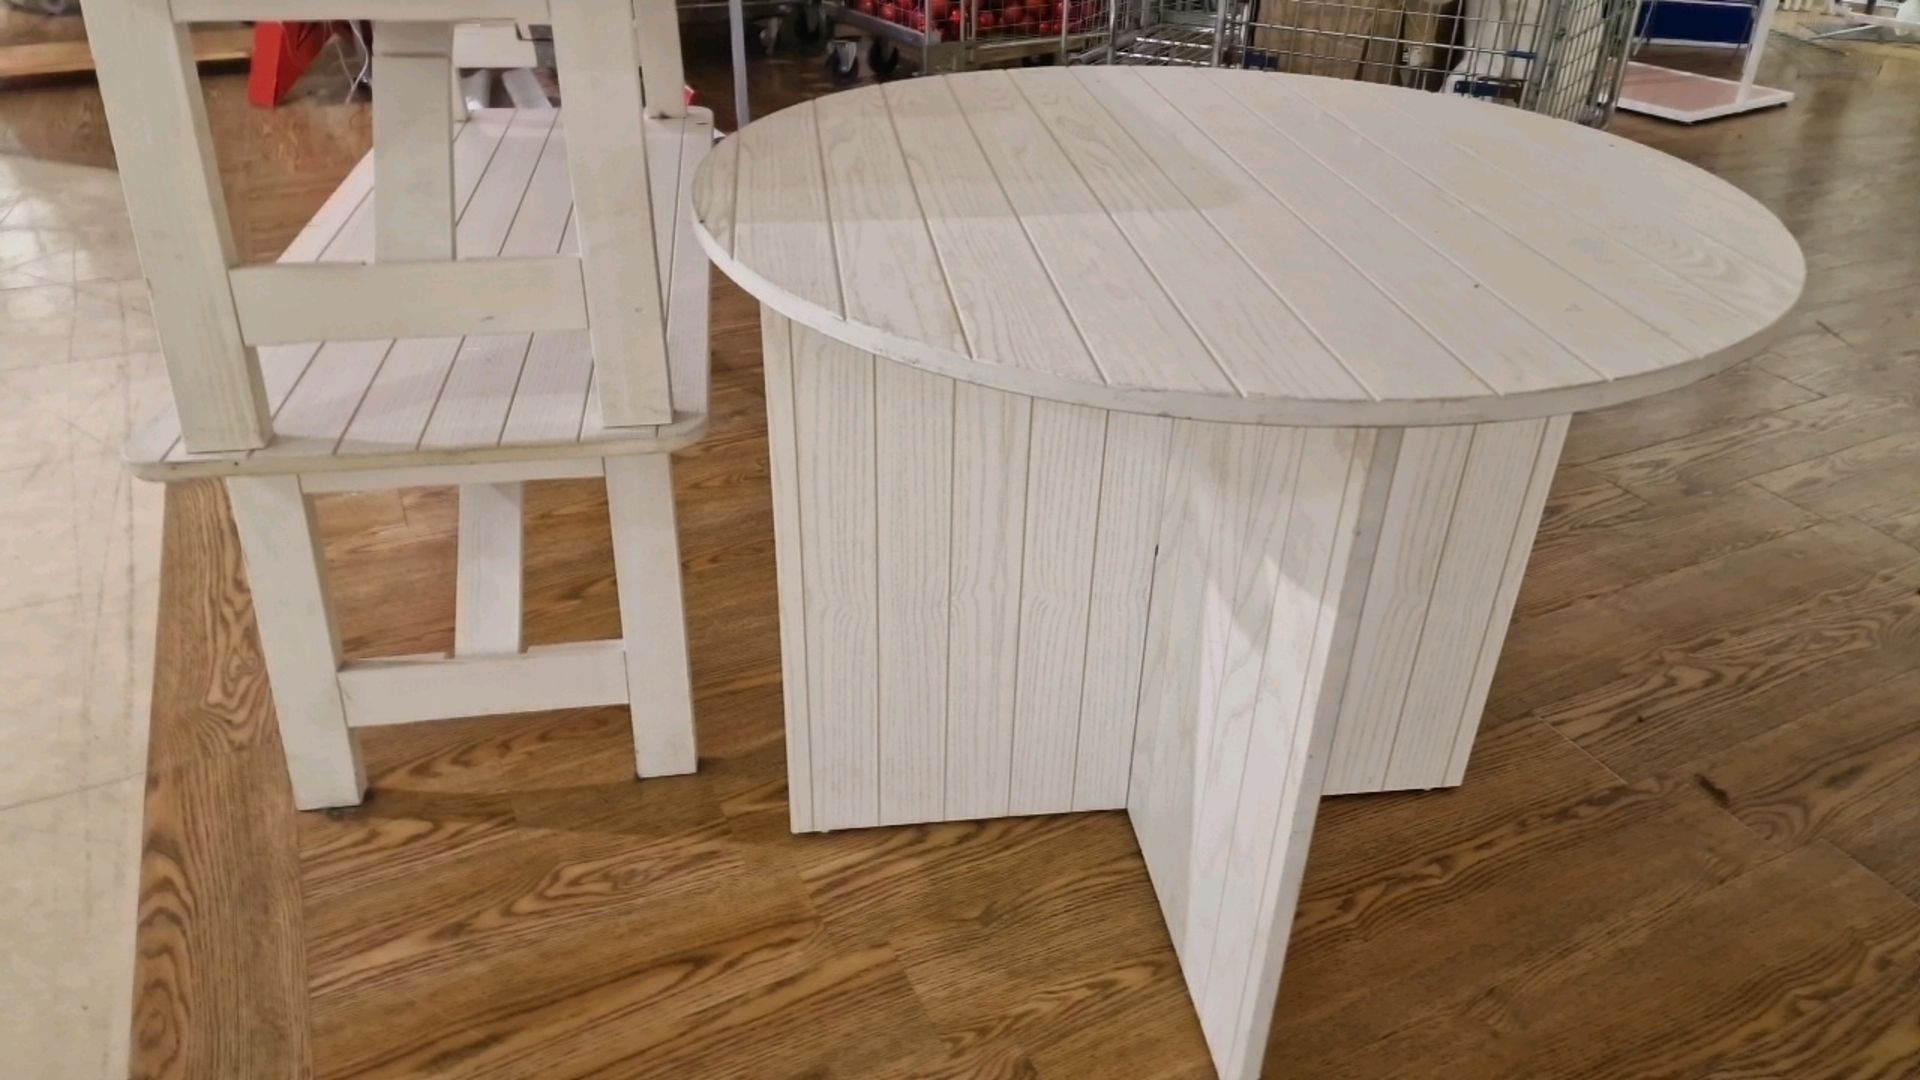 Set Of 3 Wooden Coffee Tables - Image 4 of 6